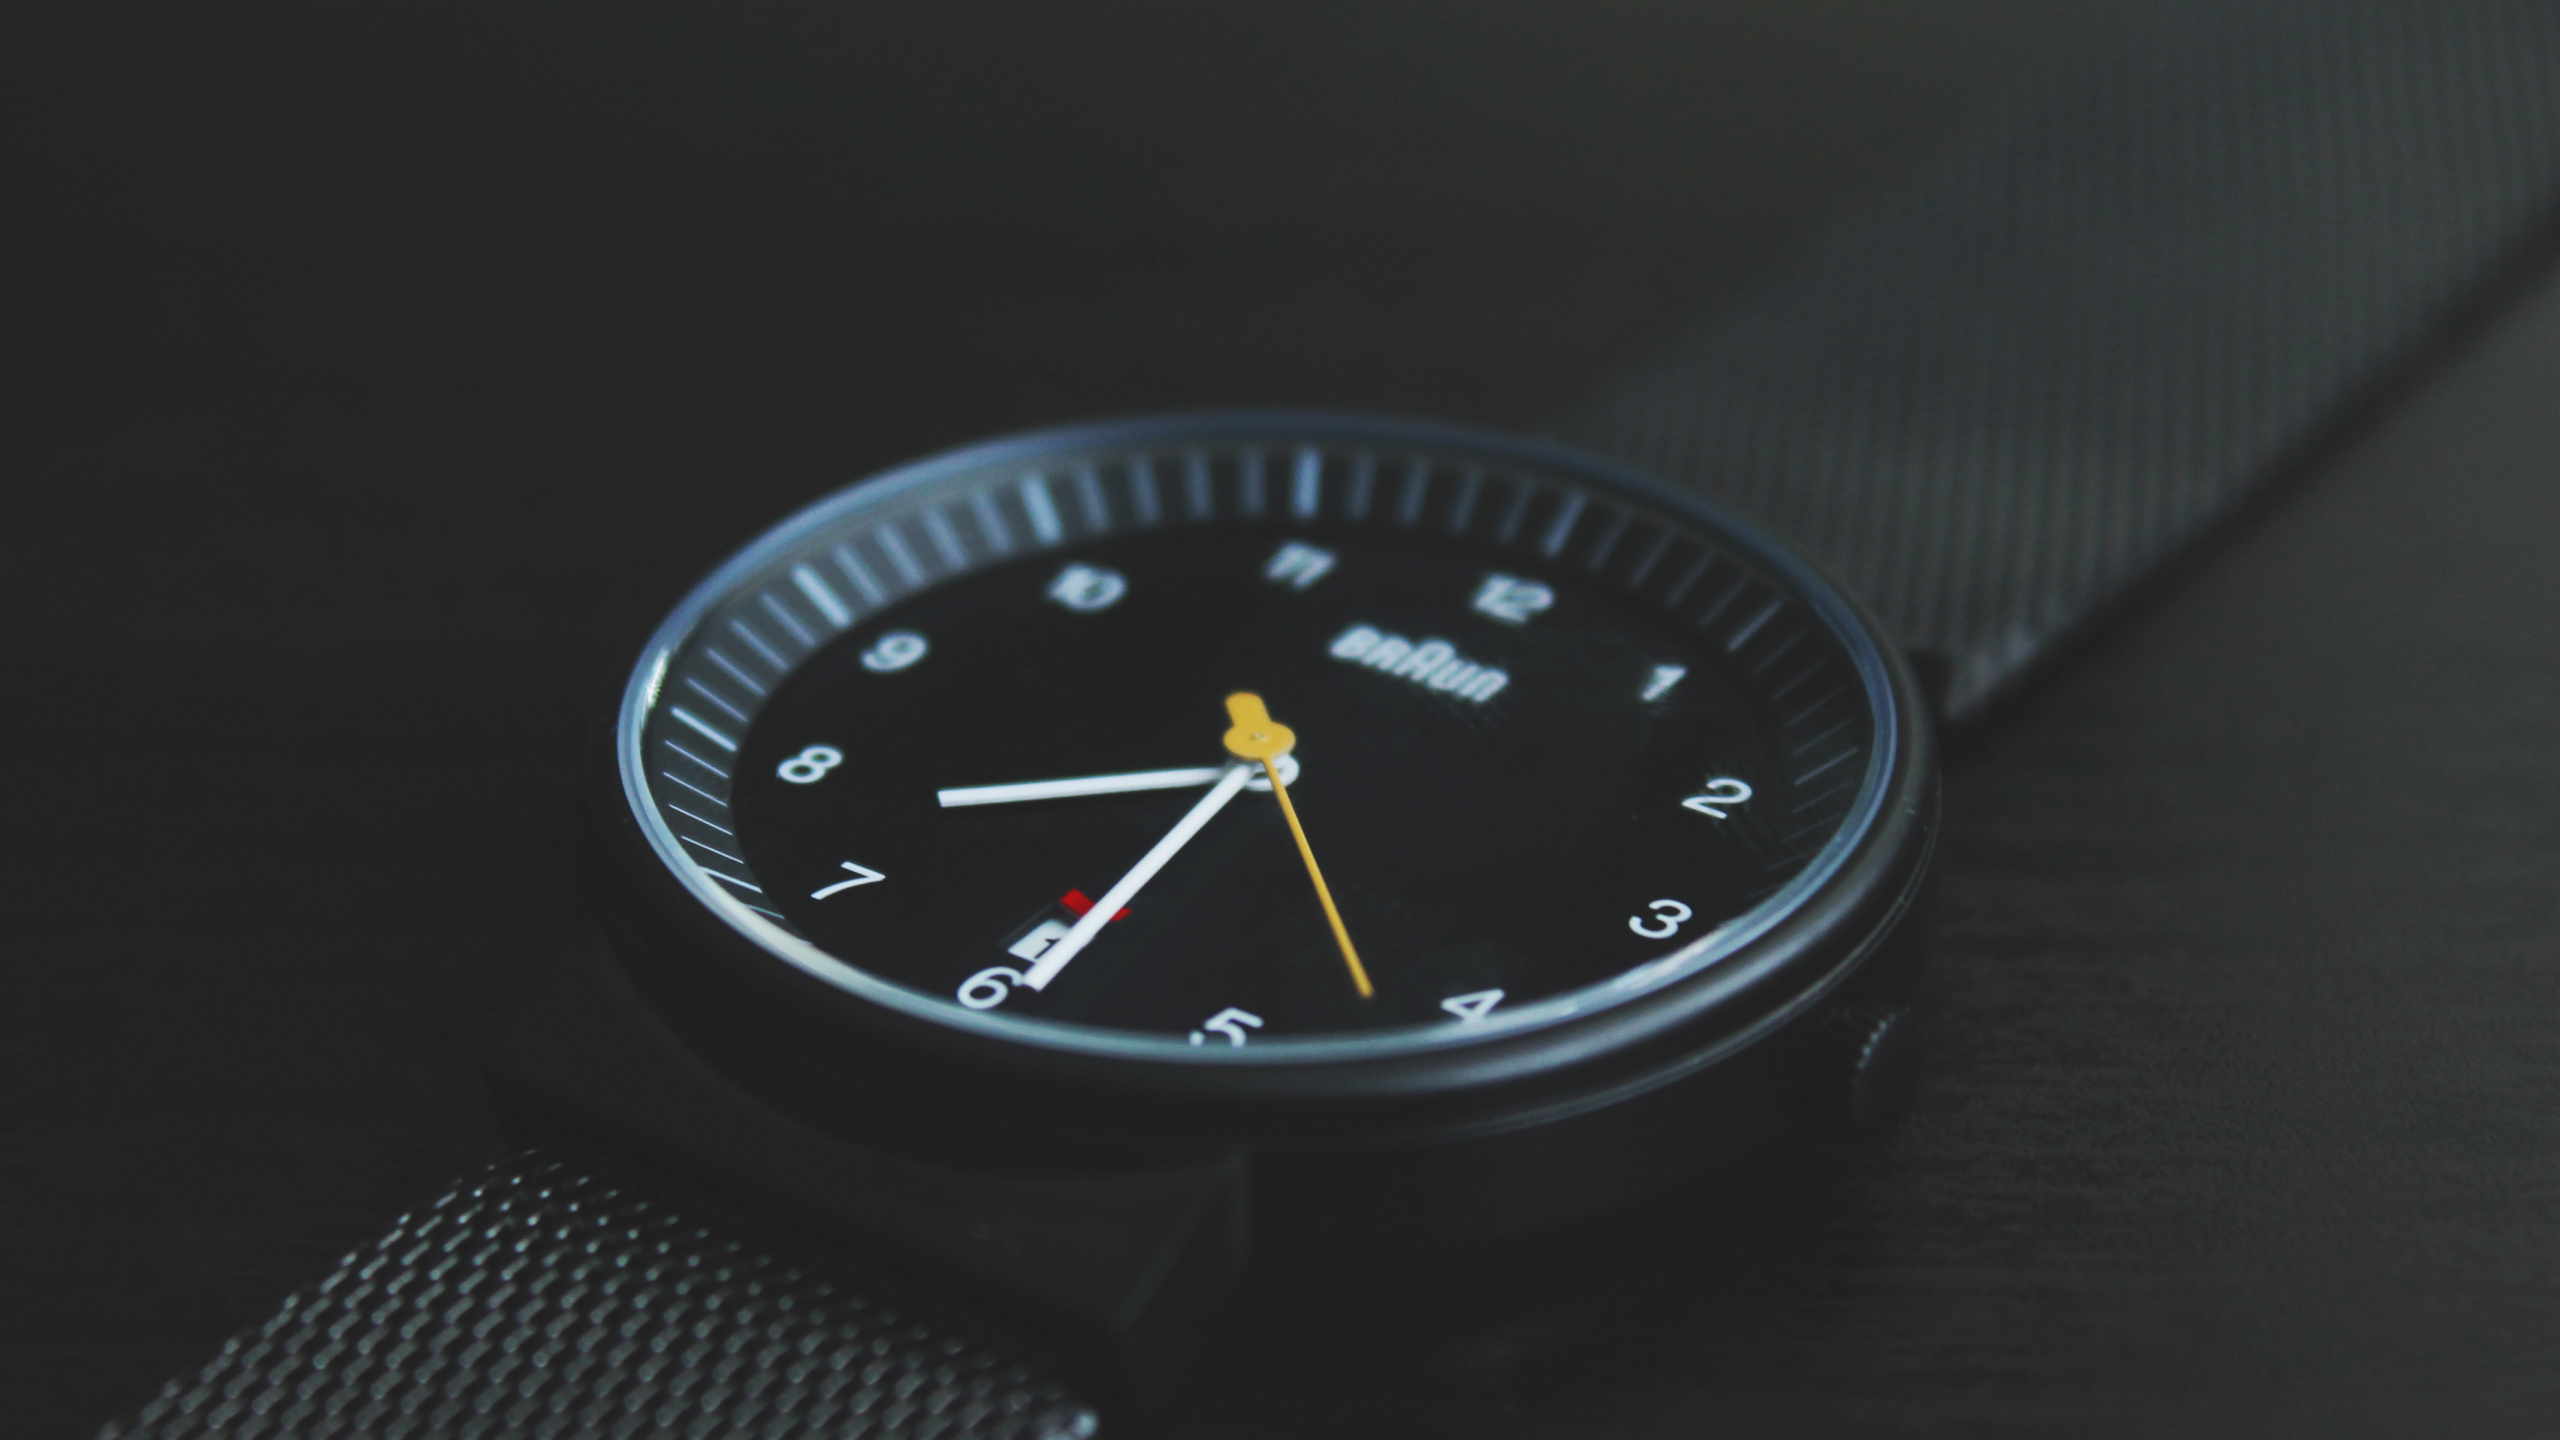 Black Analog Watch at 10 00. Wallpaper in 2560x1440 Resolution